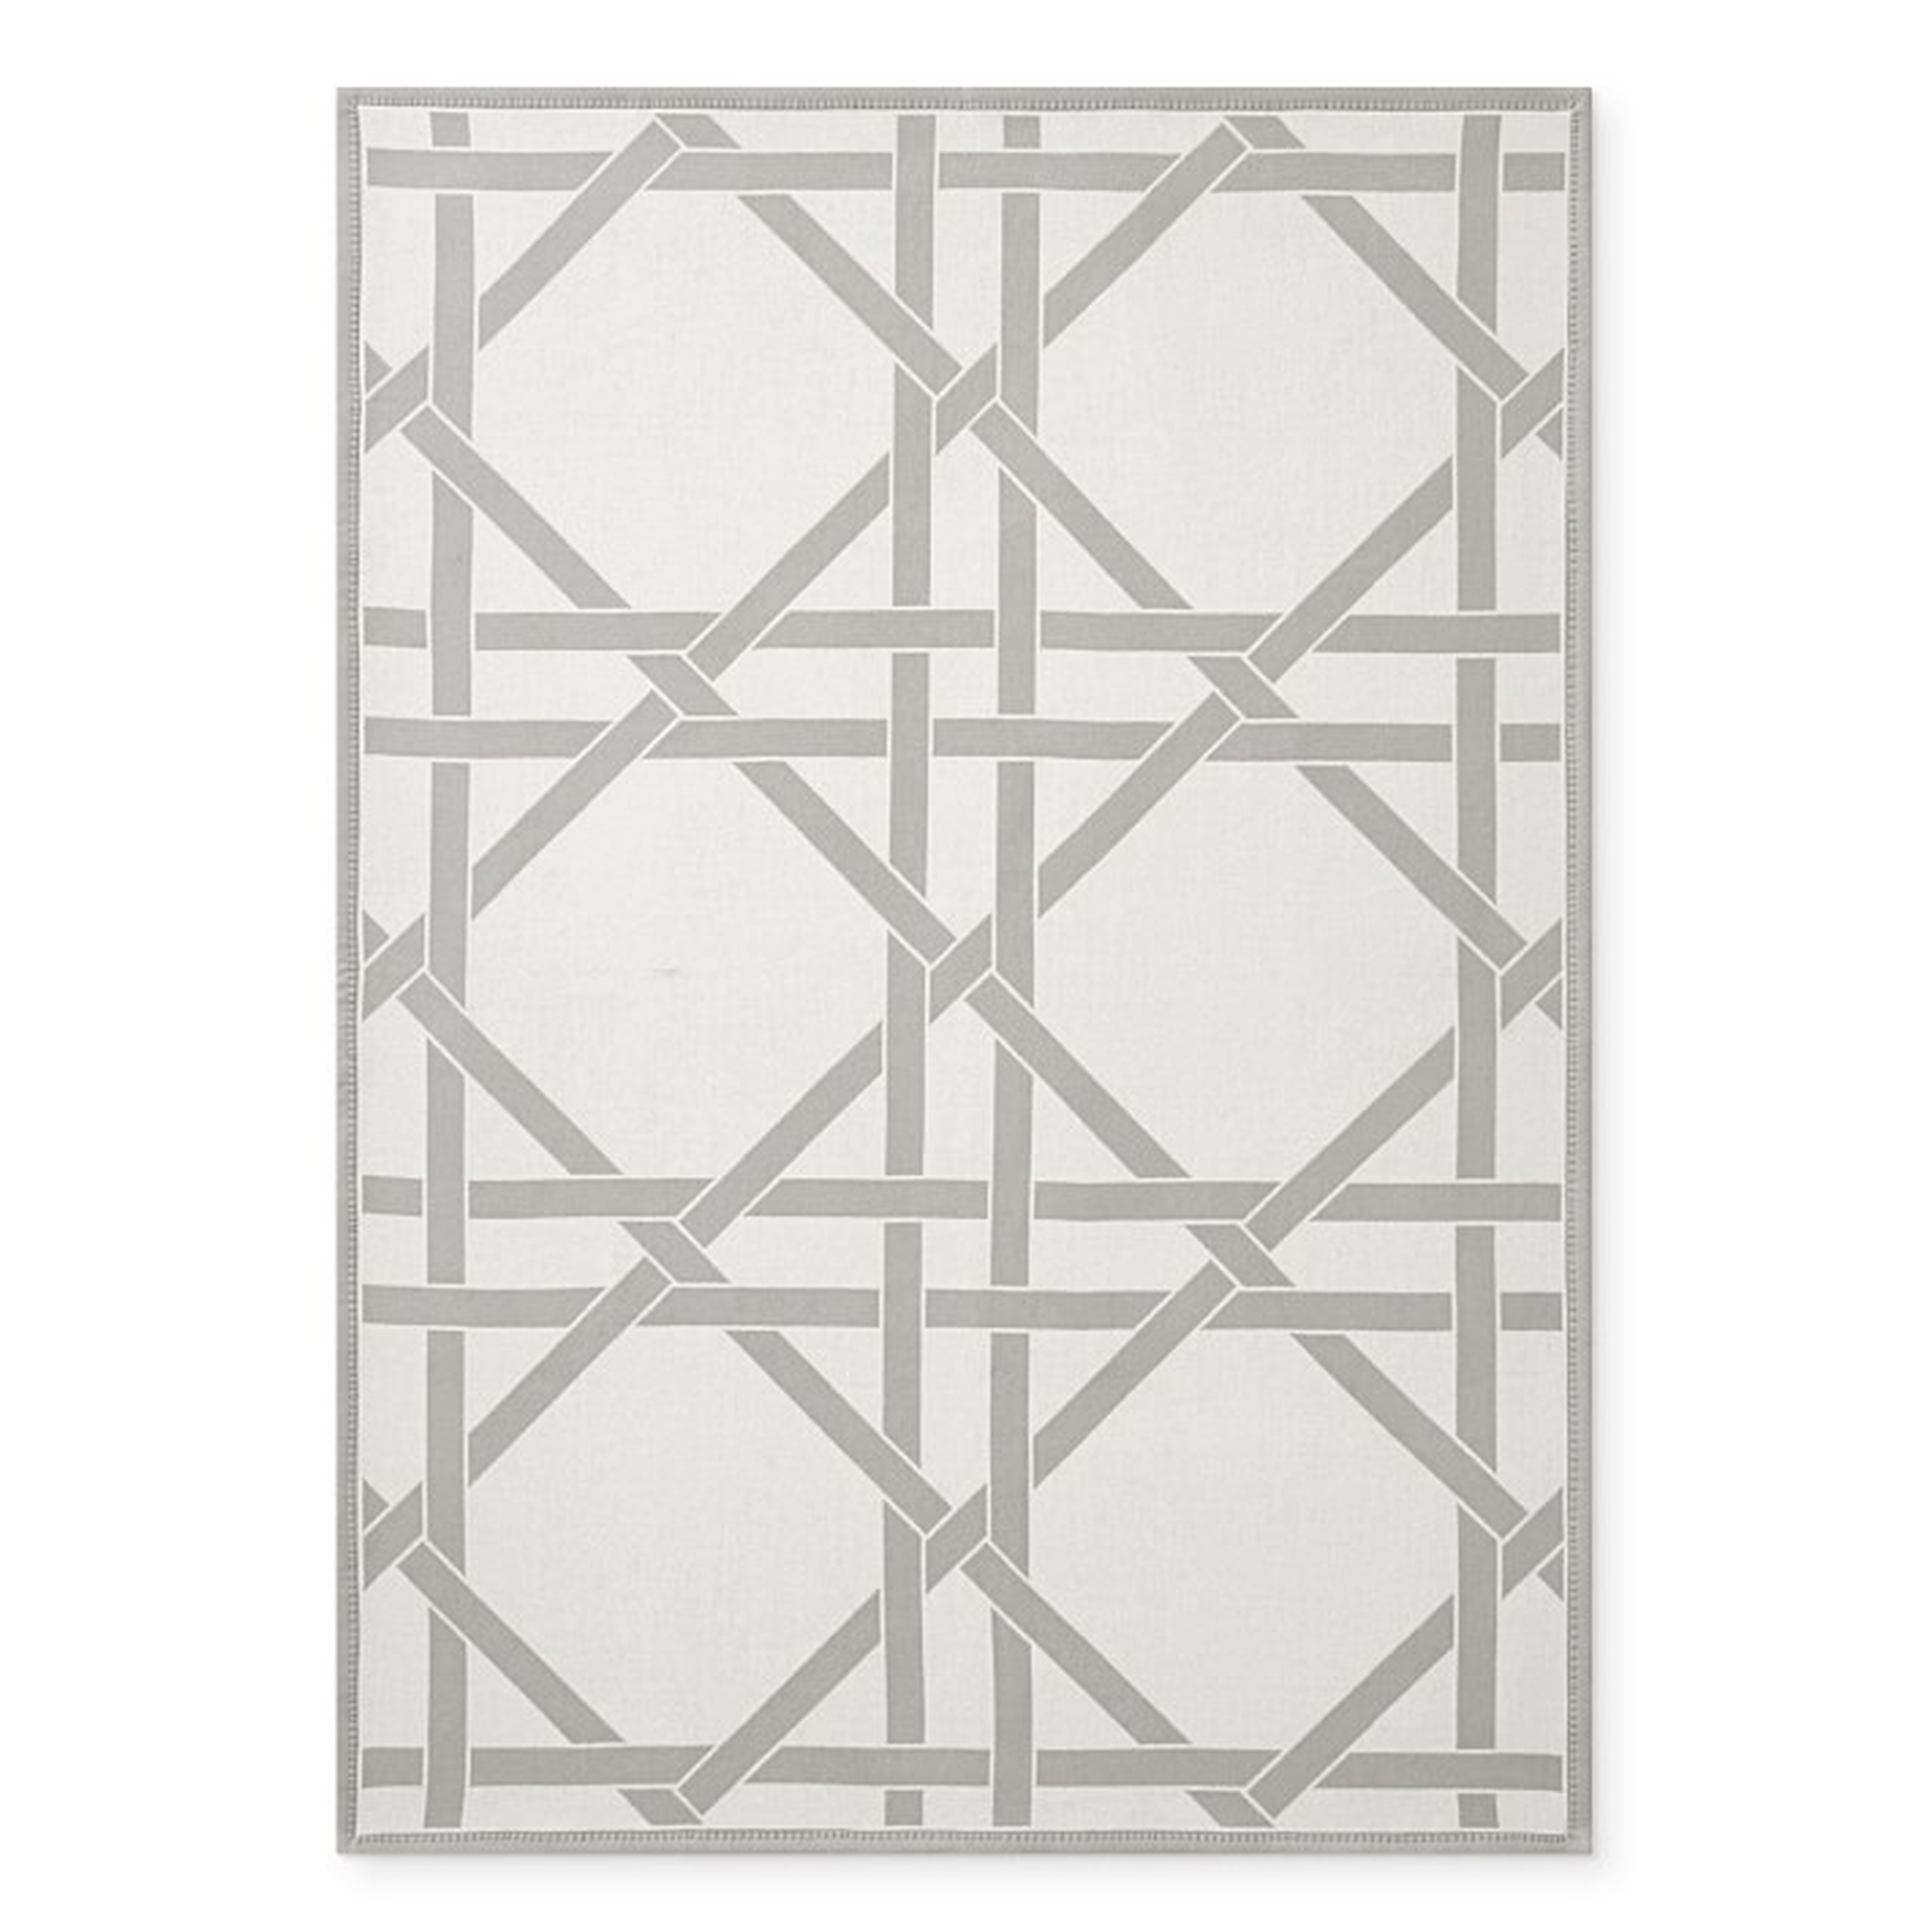 Cane Cashmere and Wool Throw, Grey - Williams Sonoma Home